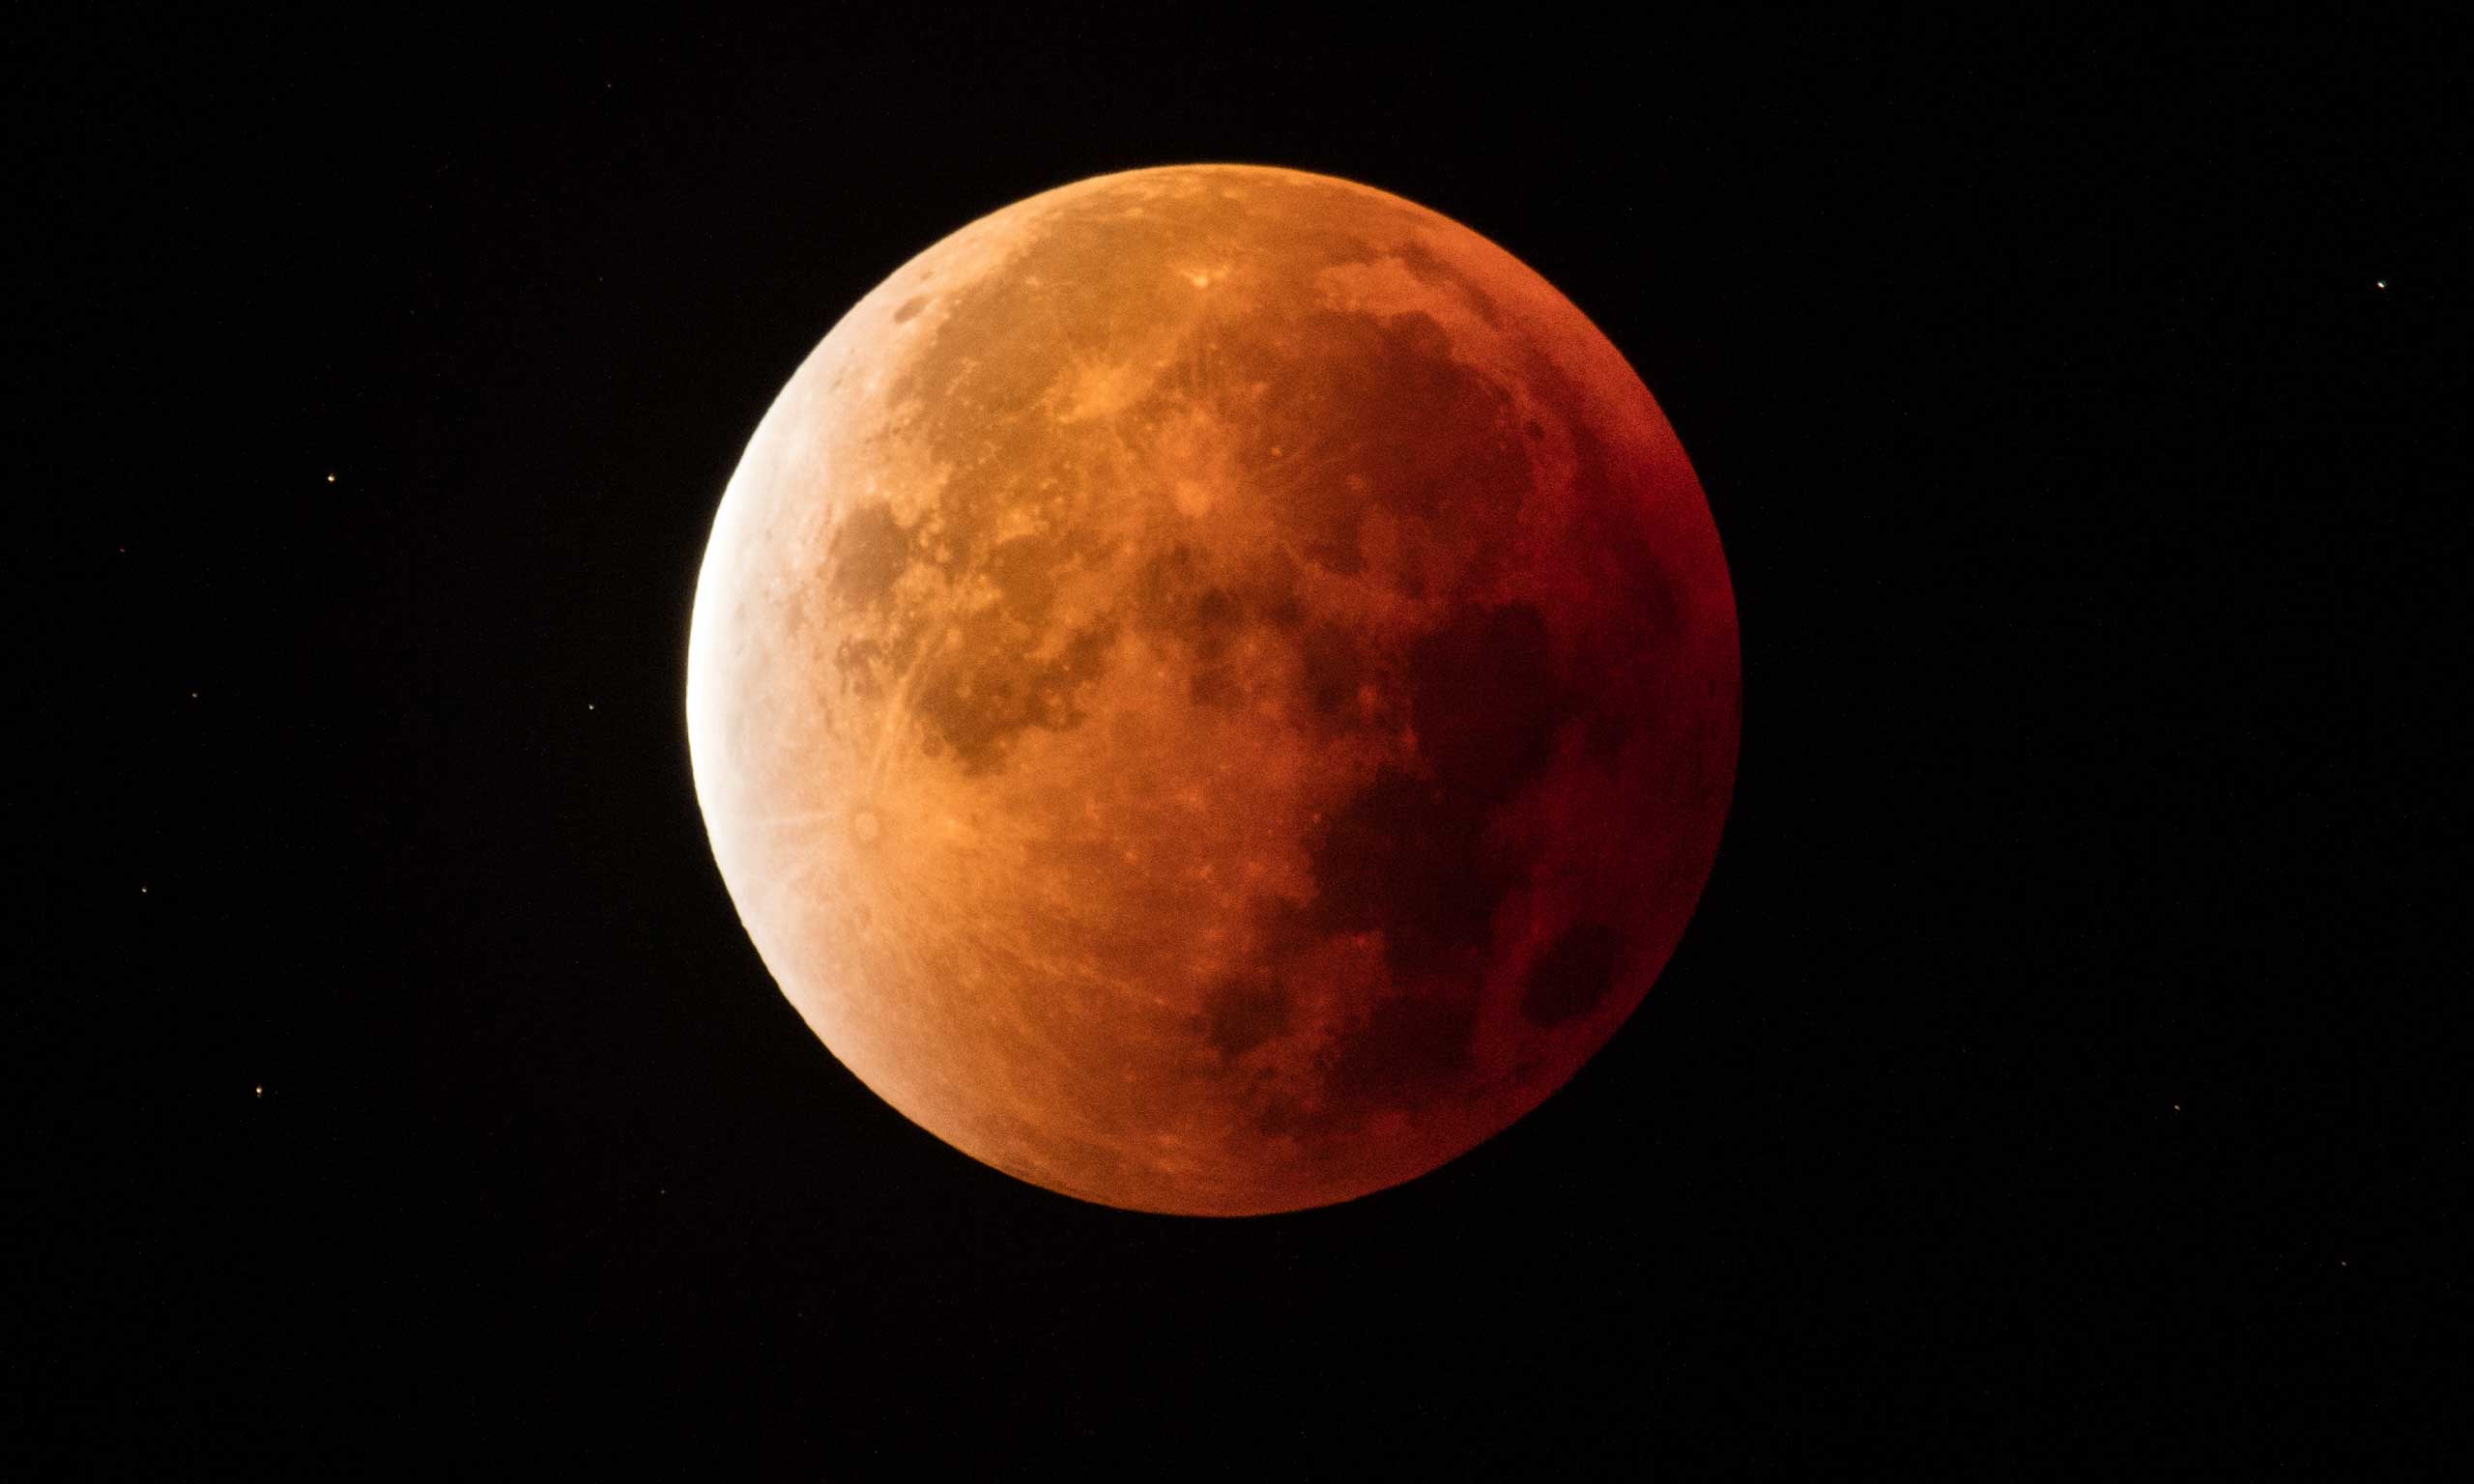 The once in a generation supermoon total lunar eclipse viewed from Glastonbury, England, on Sept. 28, 2015. Three decades had passed since the last time Earth was witness to the triple crown of lunar events — a full moon, a lunar eclipse, and a lunar perigee all at the same time.